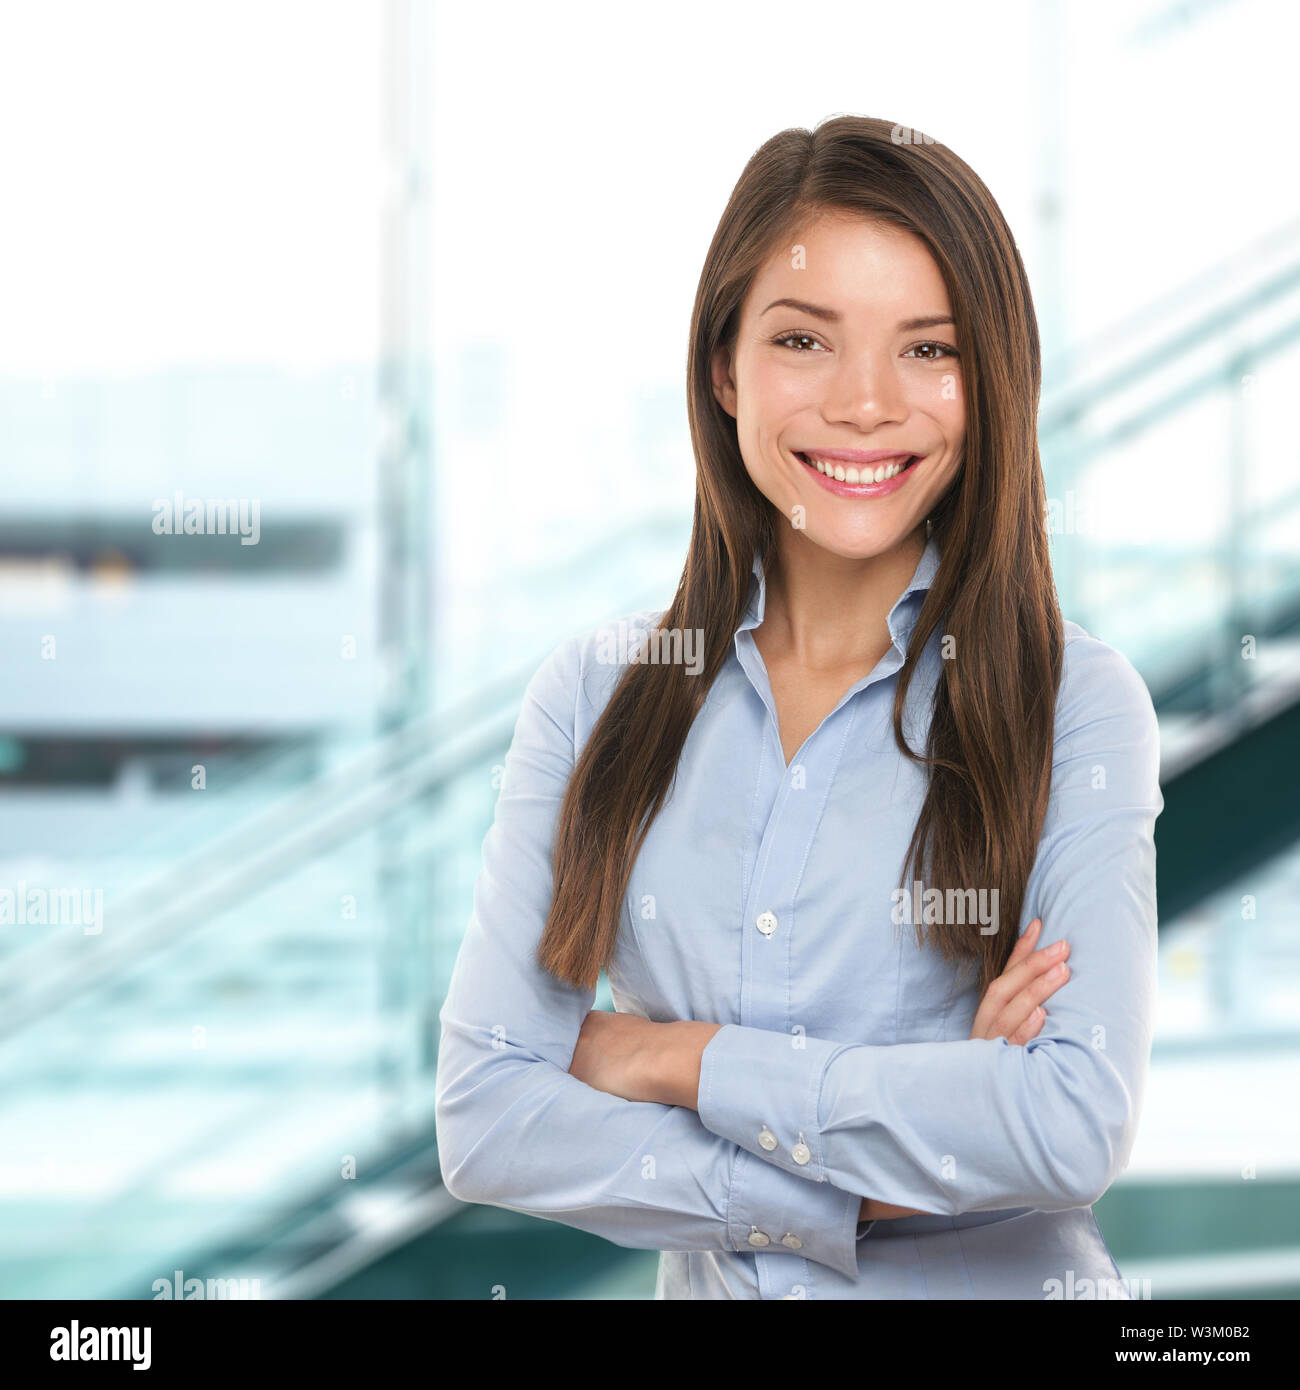 Successful business woman confident portrait. Female businesswoman standing proud and cross-armed looking at camera. Multiracial Asian Chinese / Caucasian female in her 20s. Stock Photo